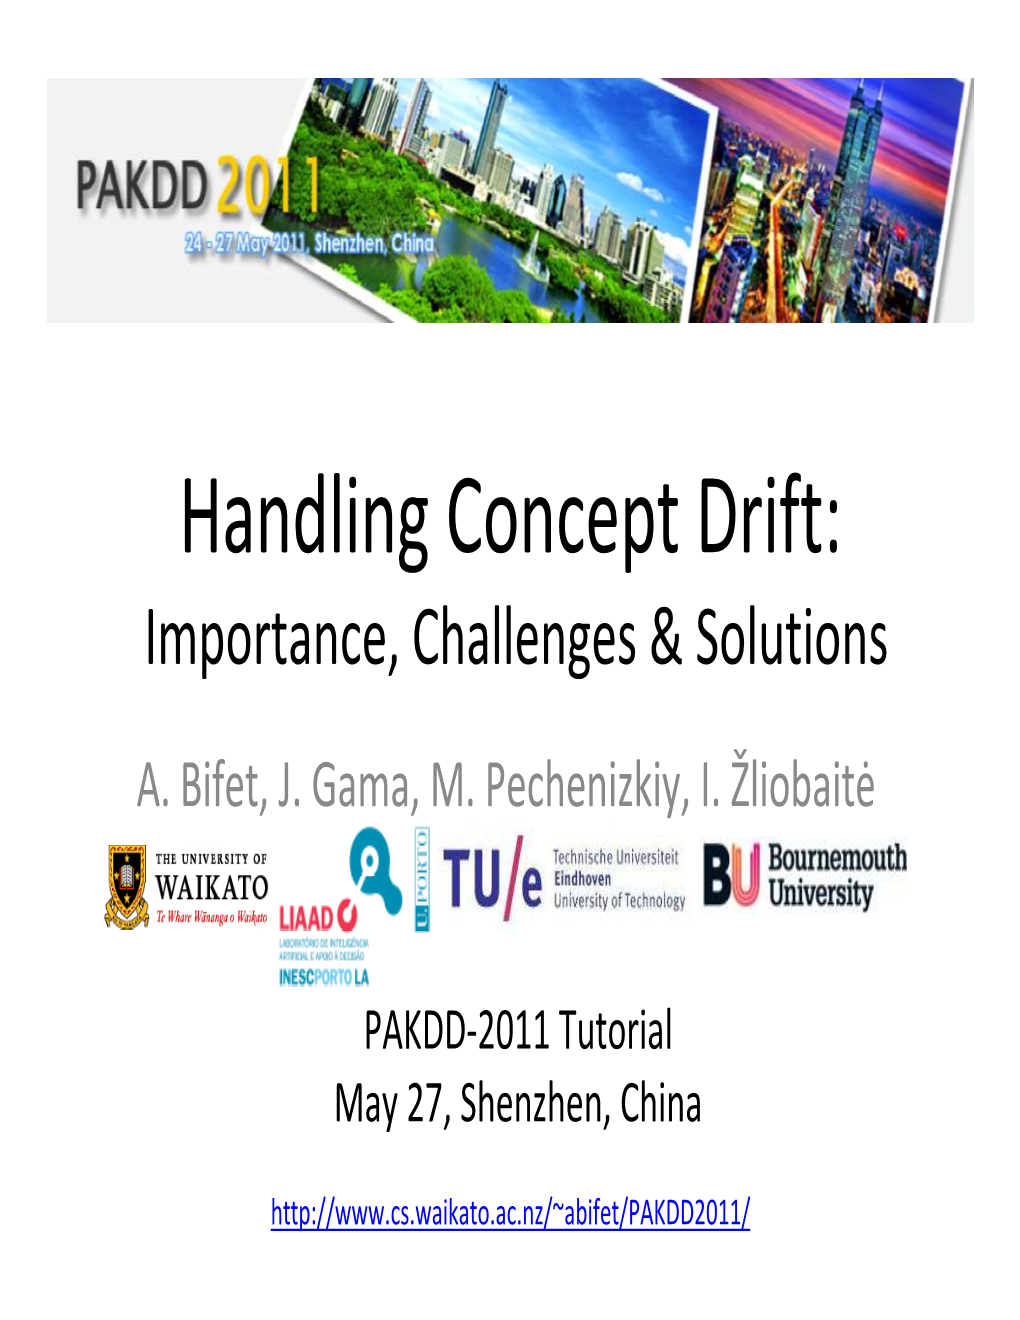 Handling Concept Drift: Importance, Challenges & Solutions